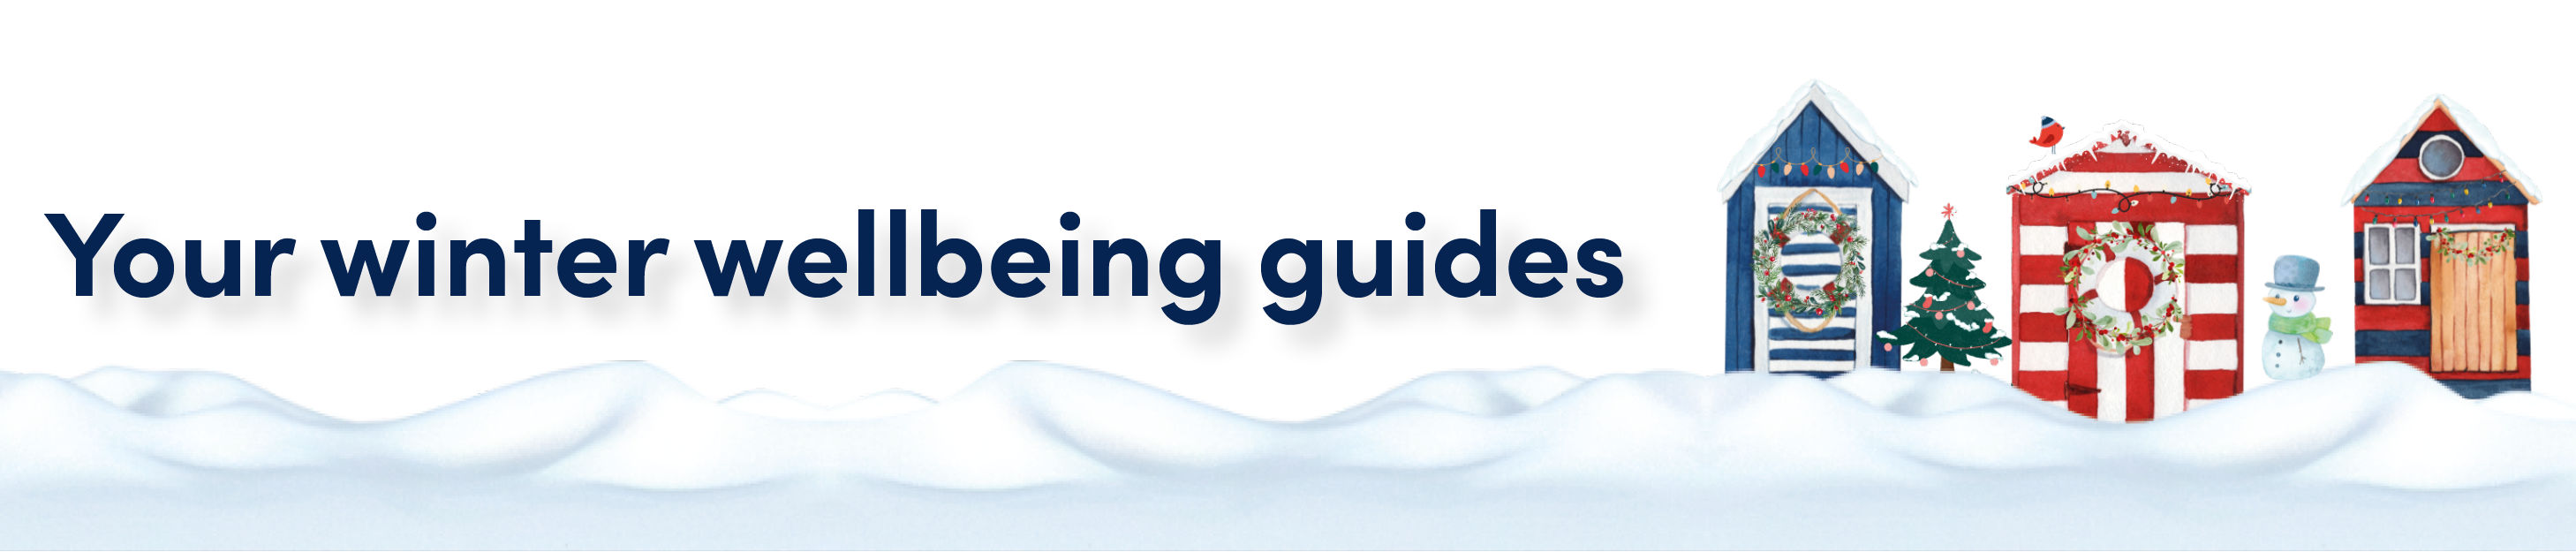 Your winter wellbeing guides